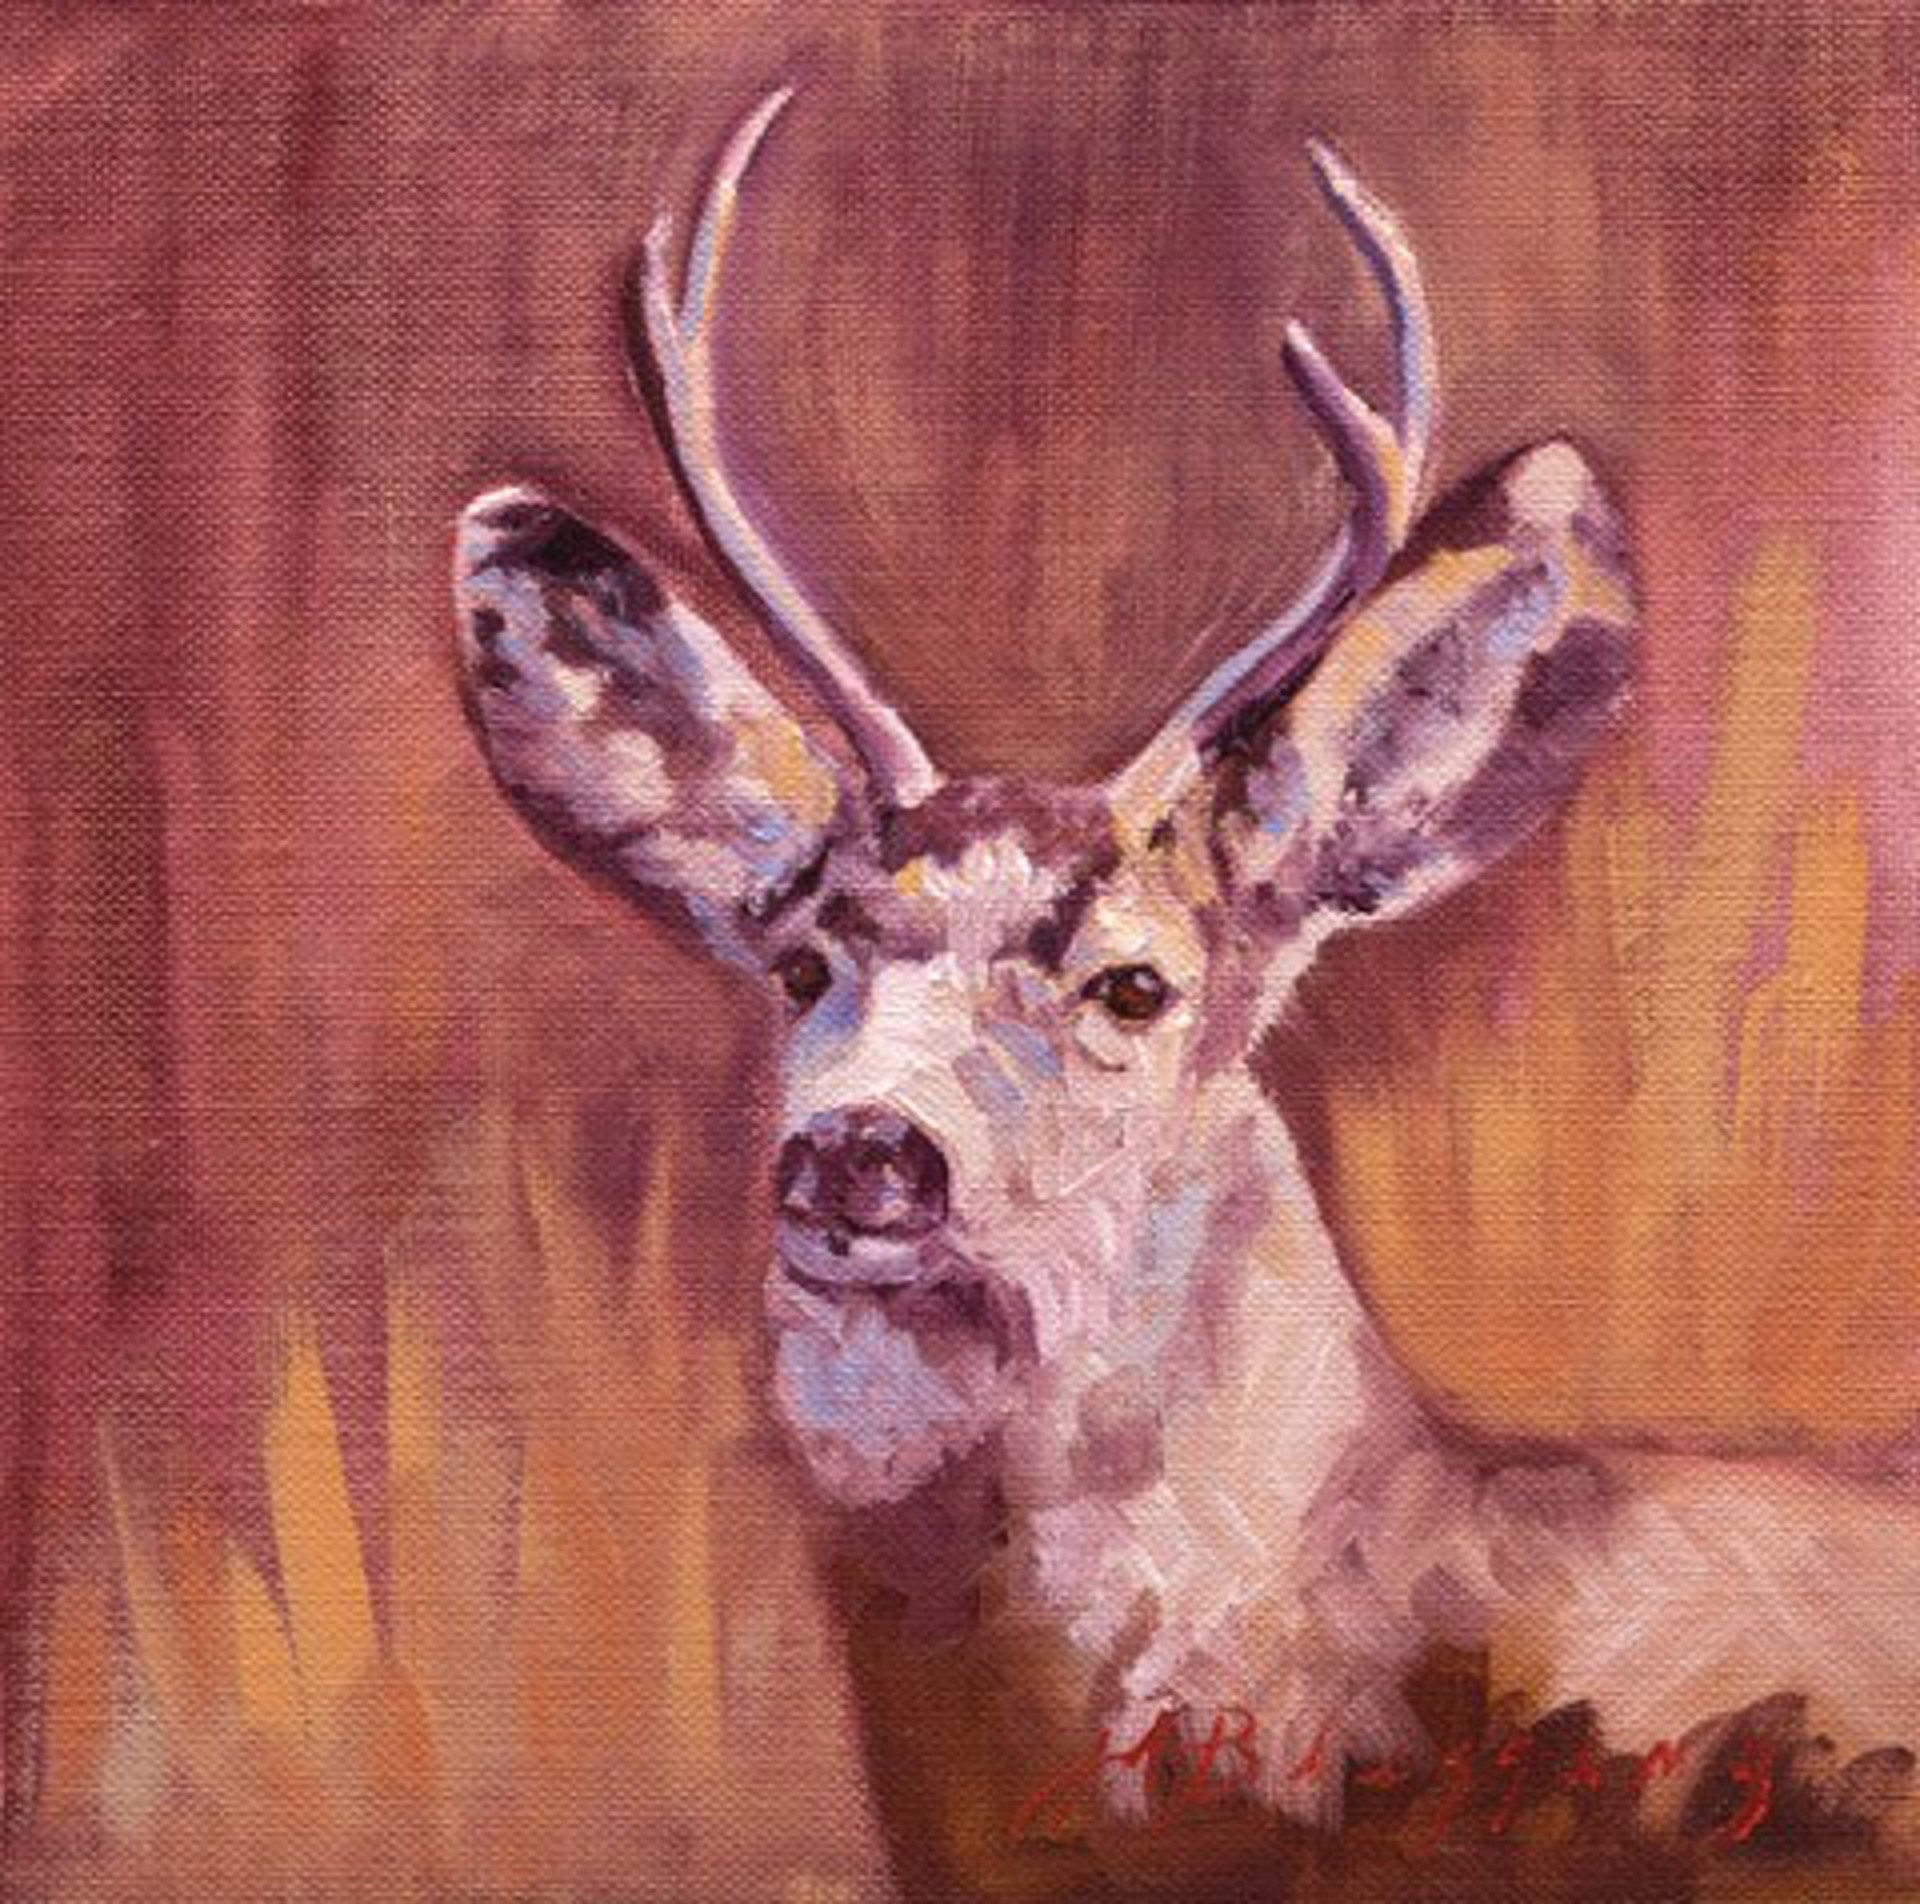 Original Oil Painting Featuring A Buck Deer Portrait Over Red Abstract Background